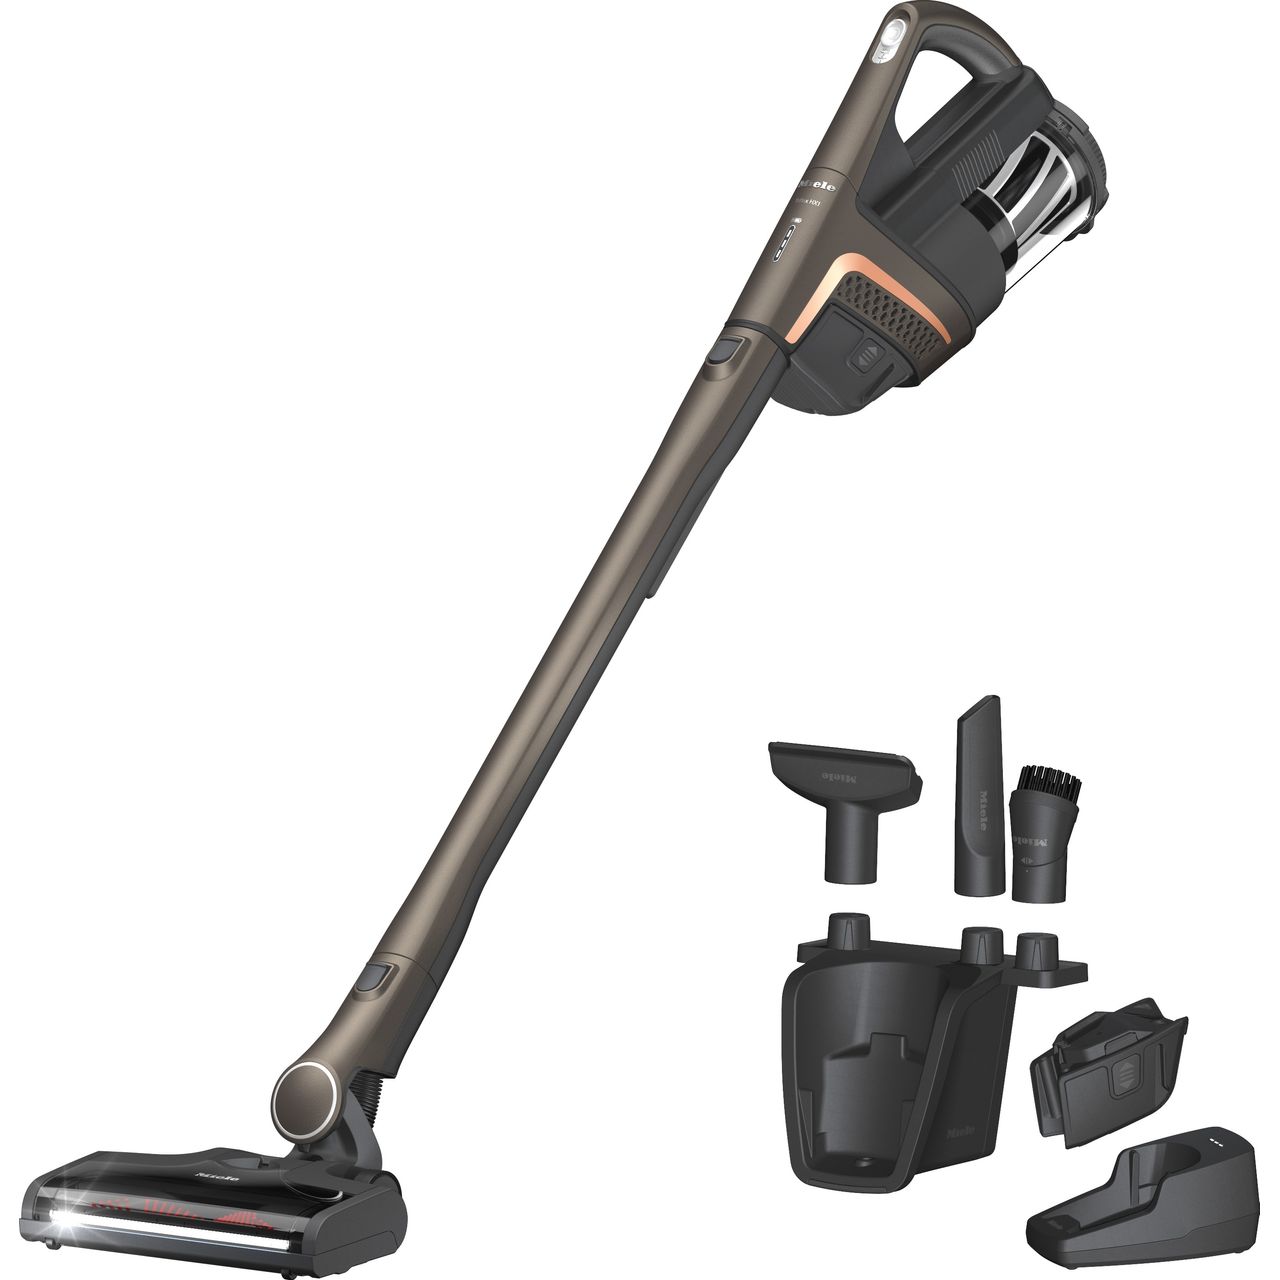 Miele Triflex HX1 Pro Cordless Vacuum Cleaner with up to 120 Minutes Run Time Review